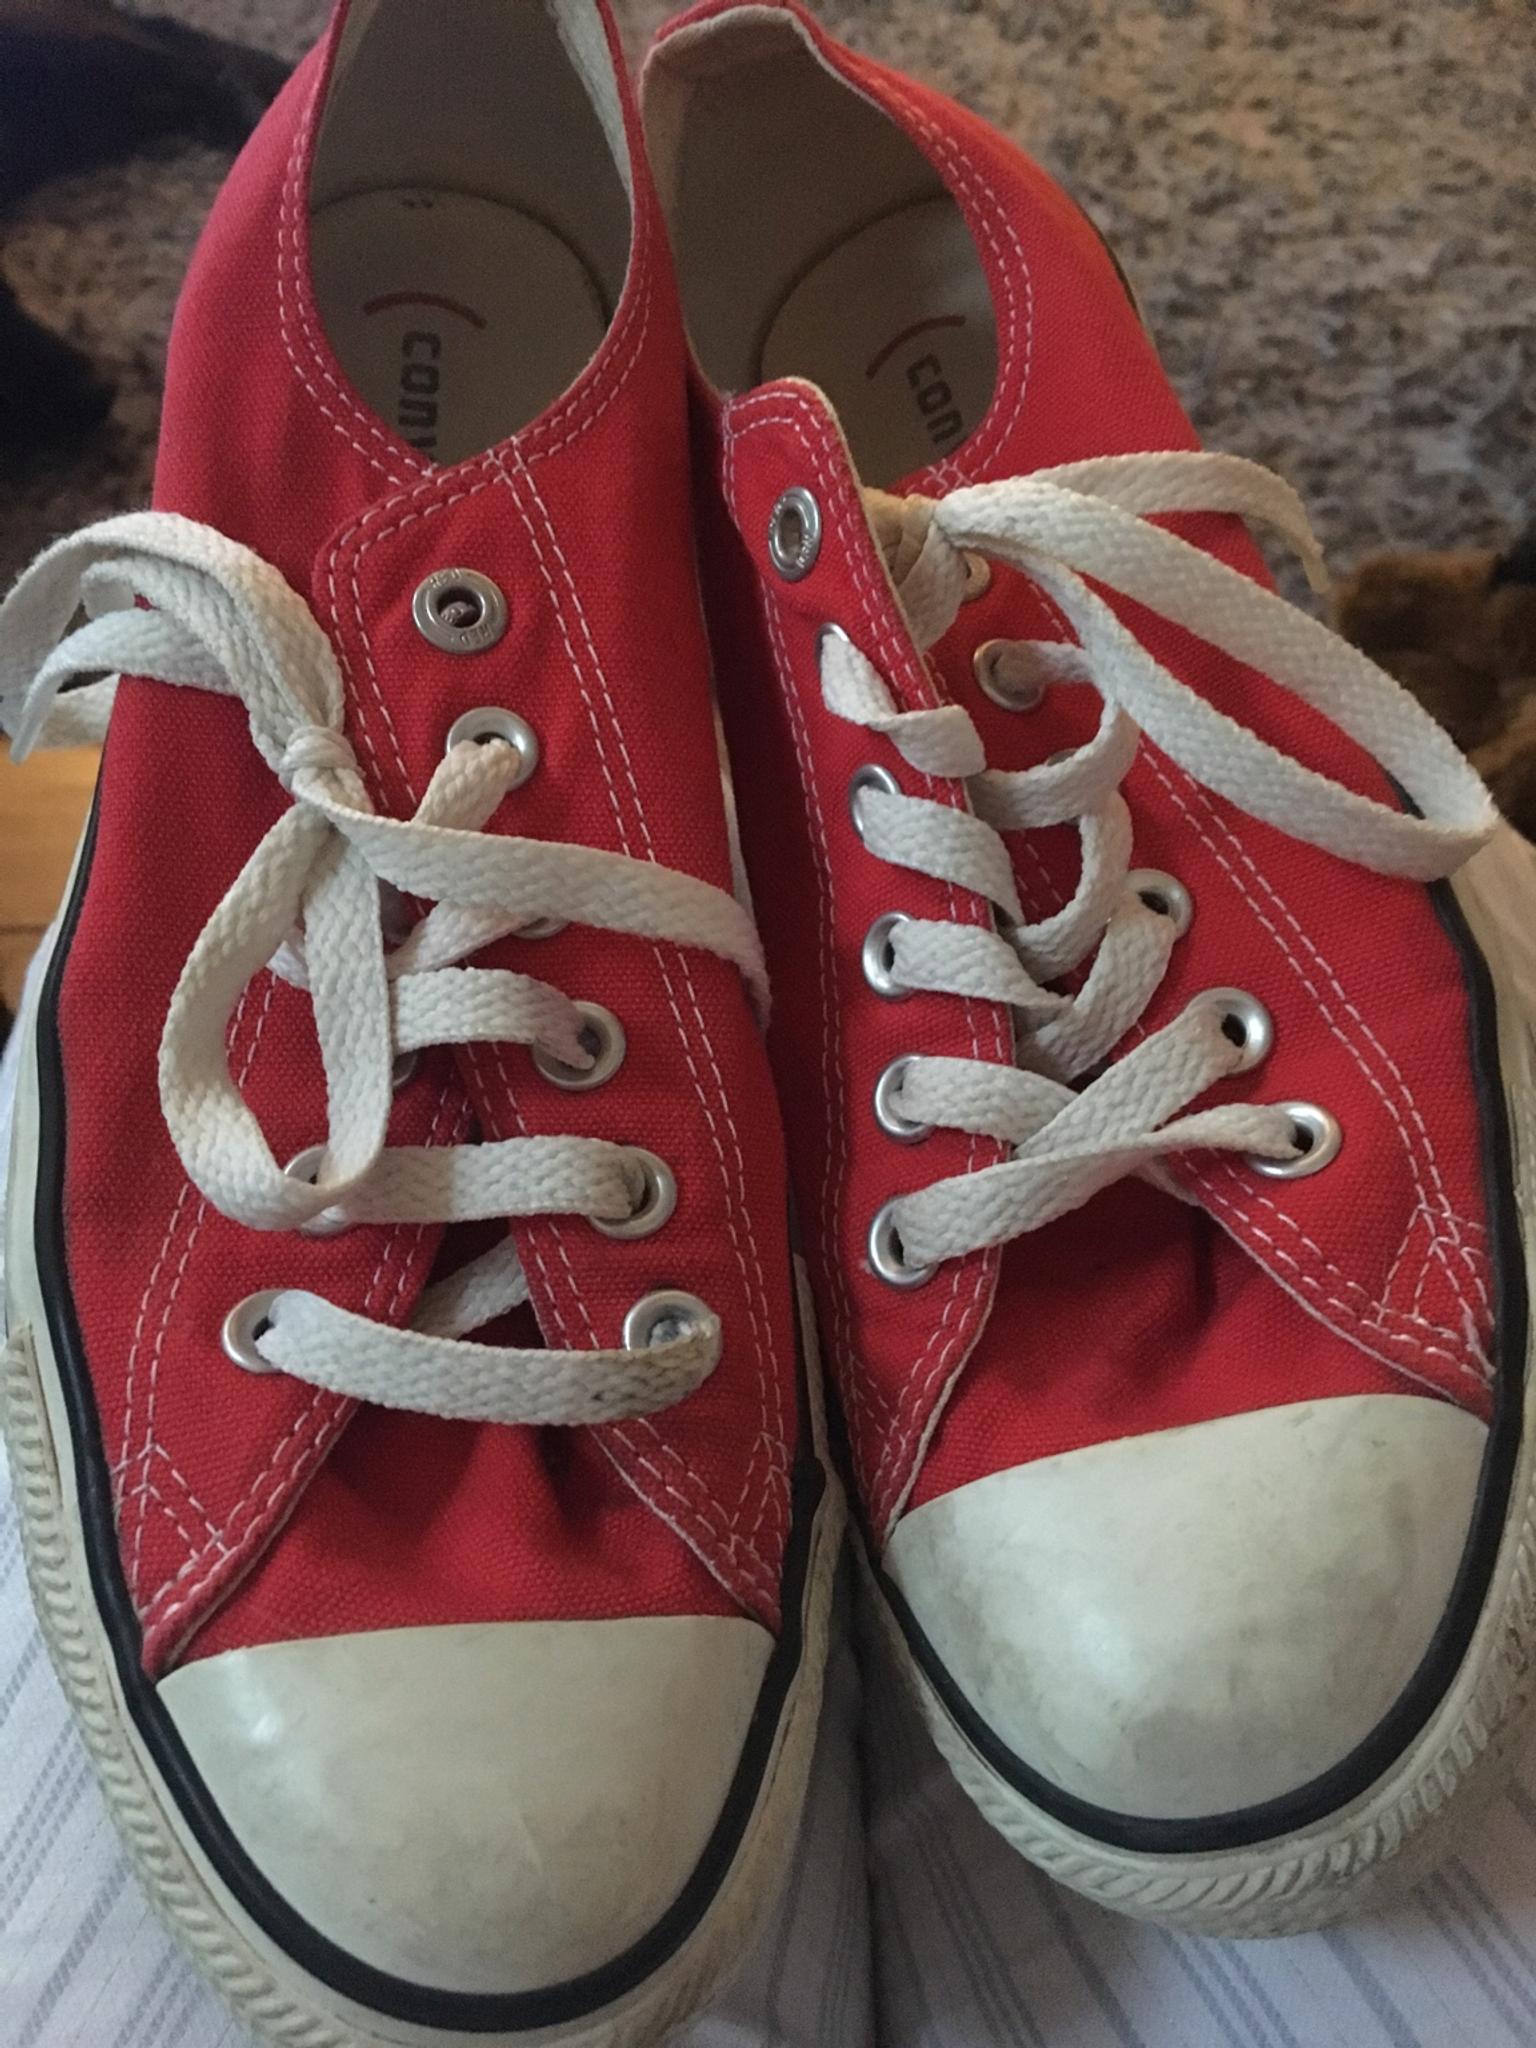 converse size 6 red